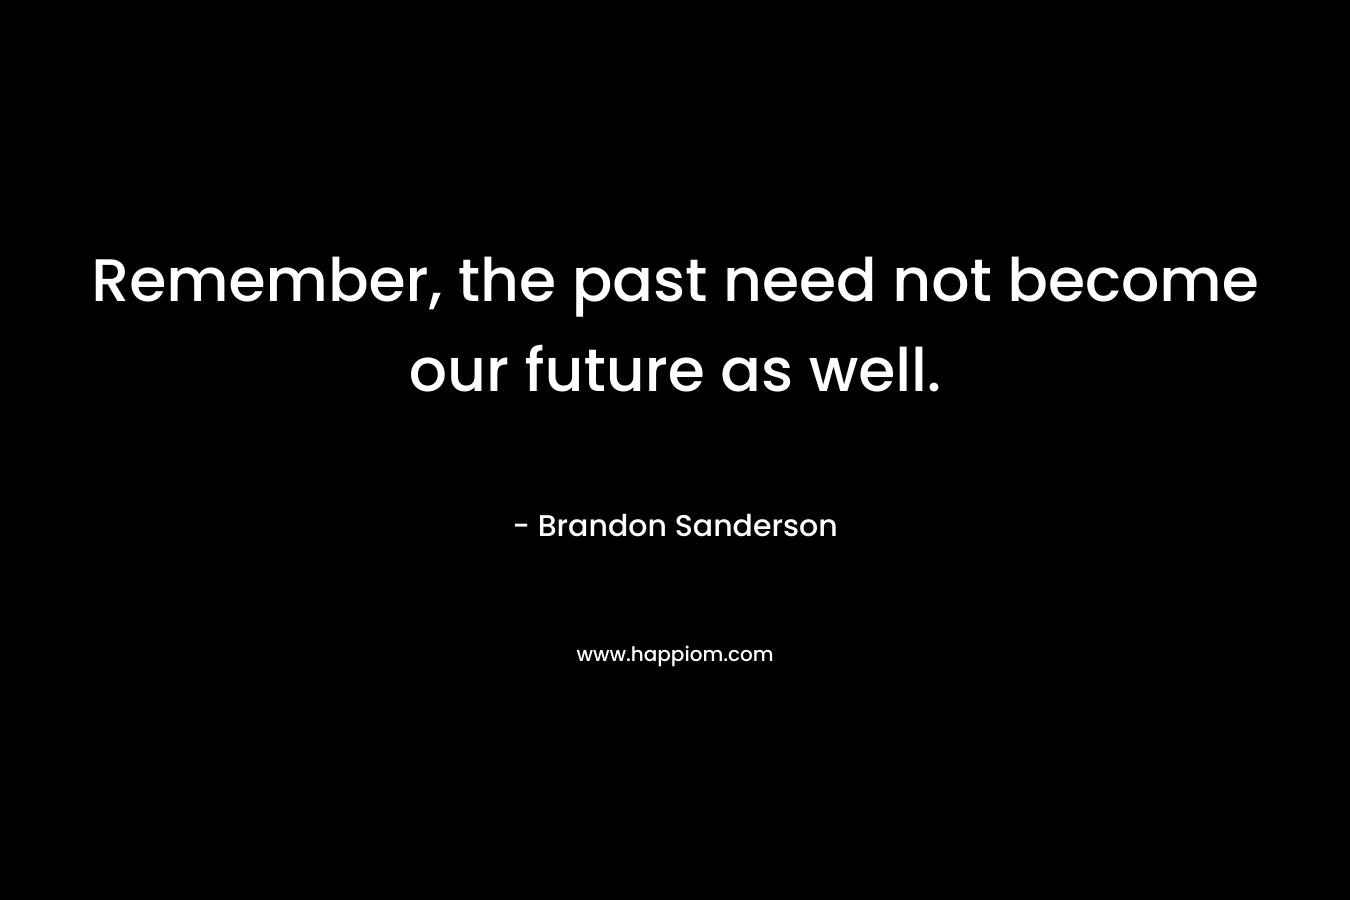 Remember, the past need not become our future as well.